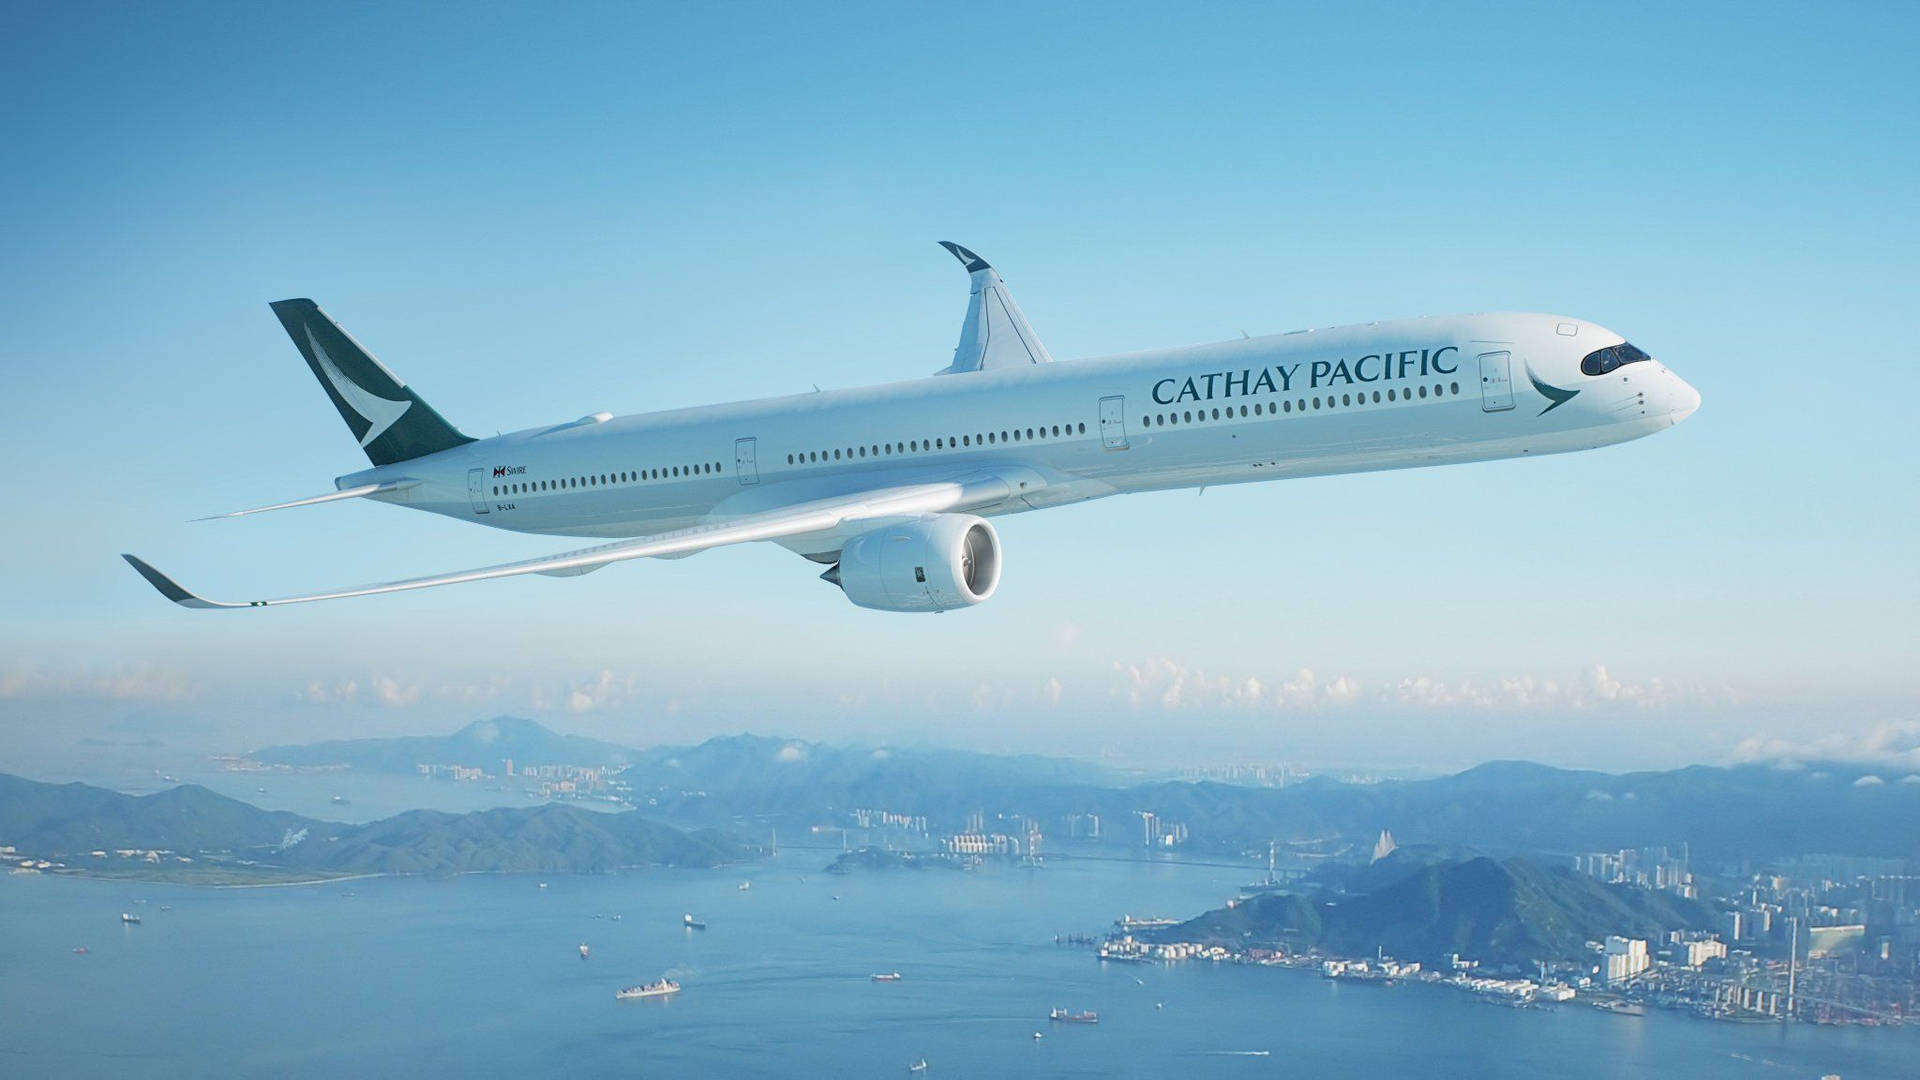 Cathay Pacific Plane Over Islands Wallpaper